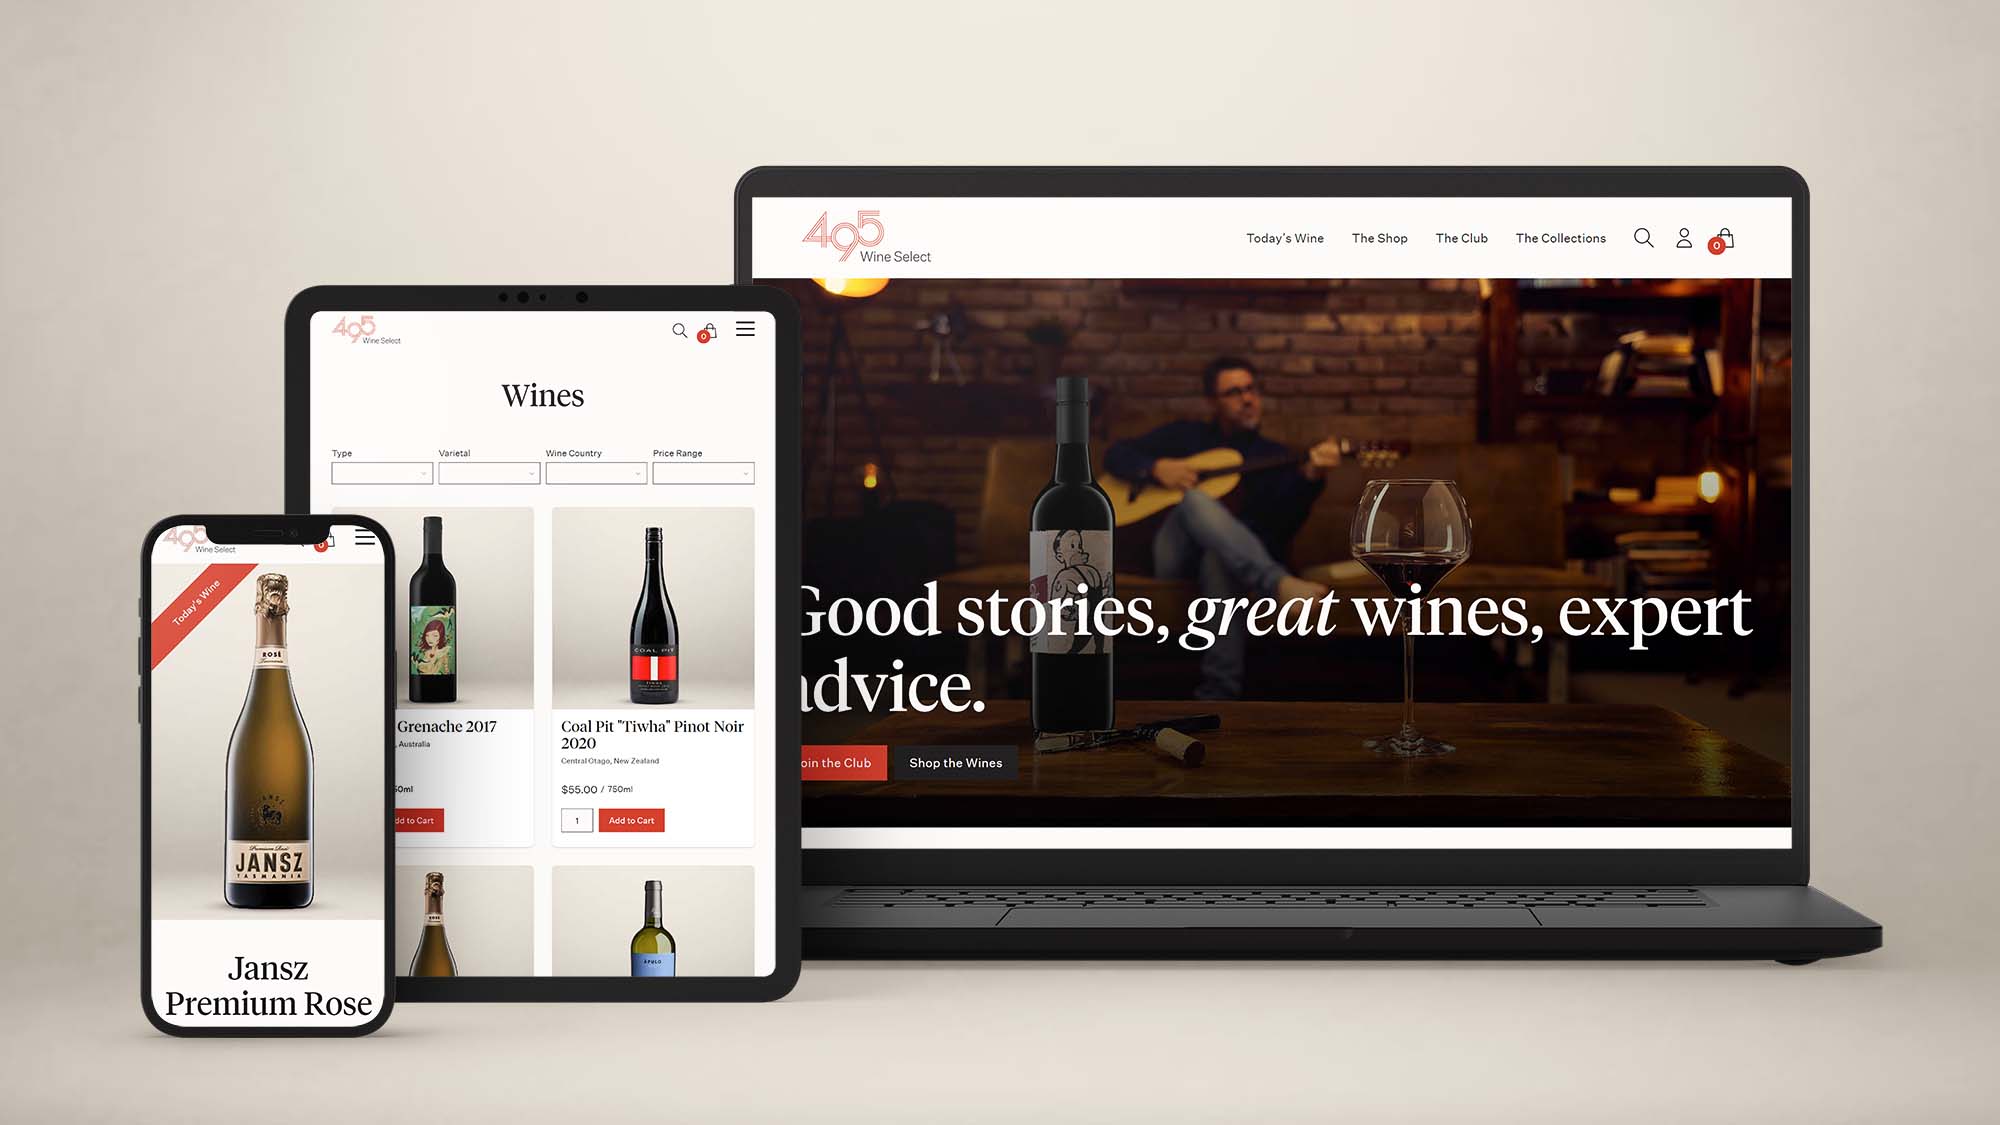 Phone, tablet and laptop views of 495 Wine Select website pages.